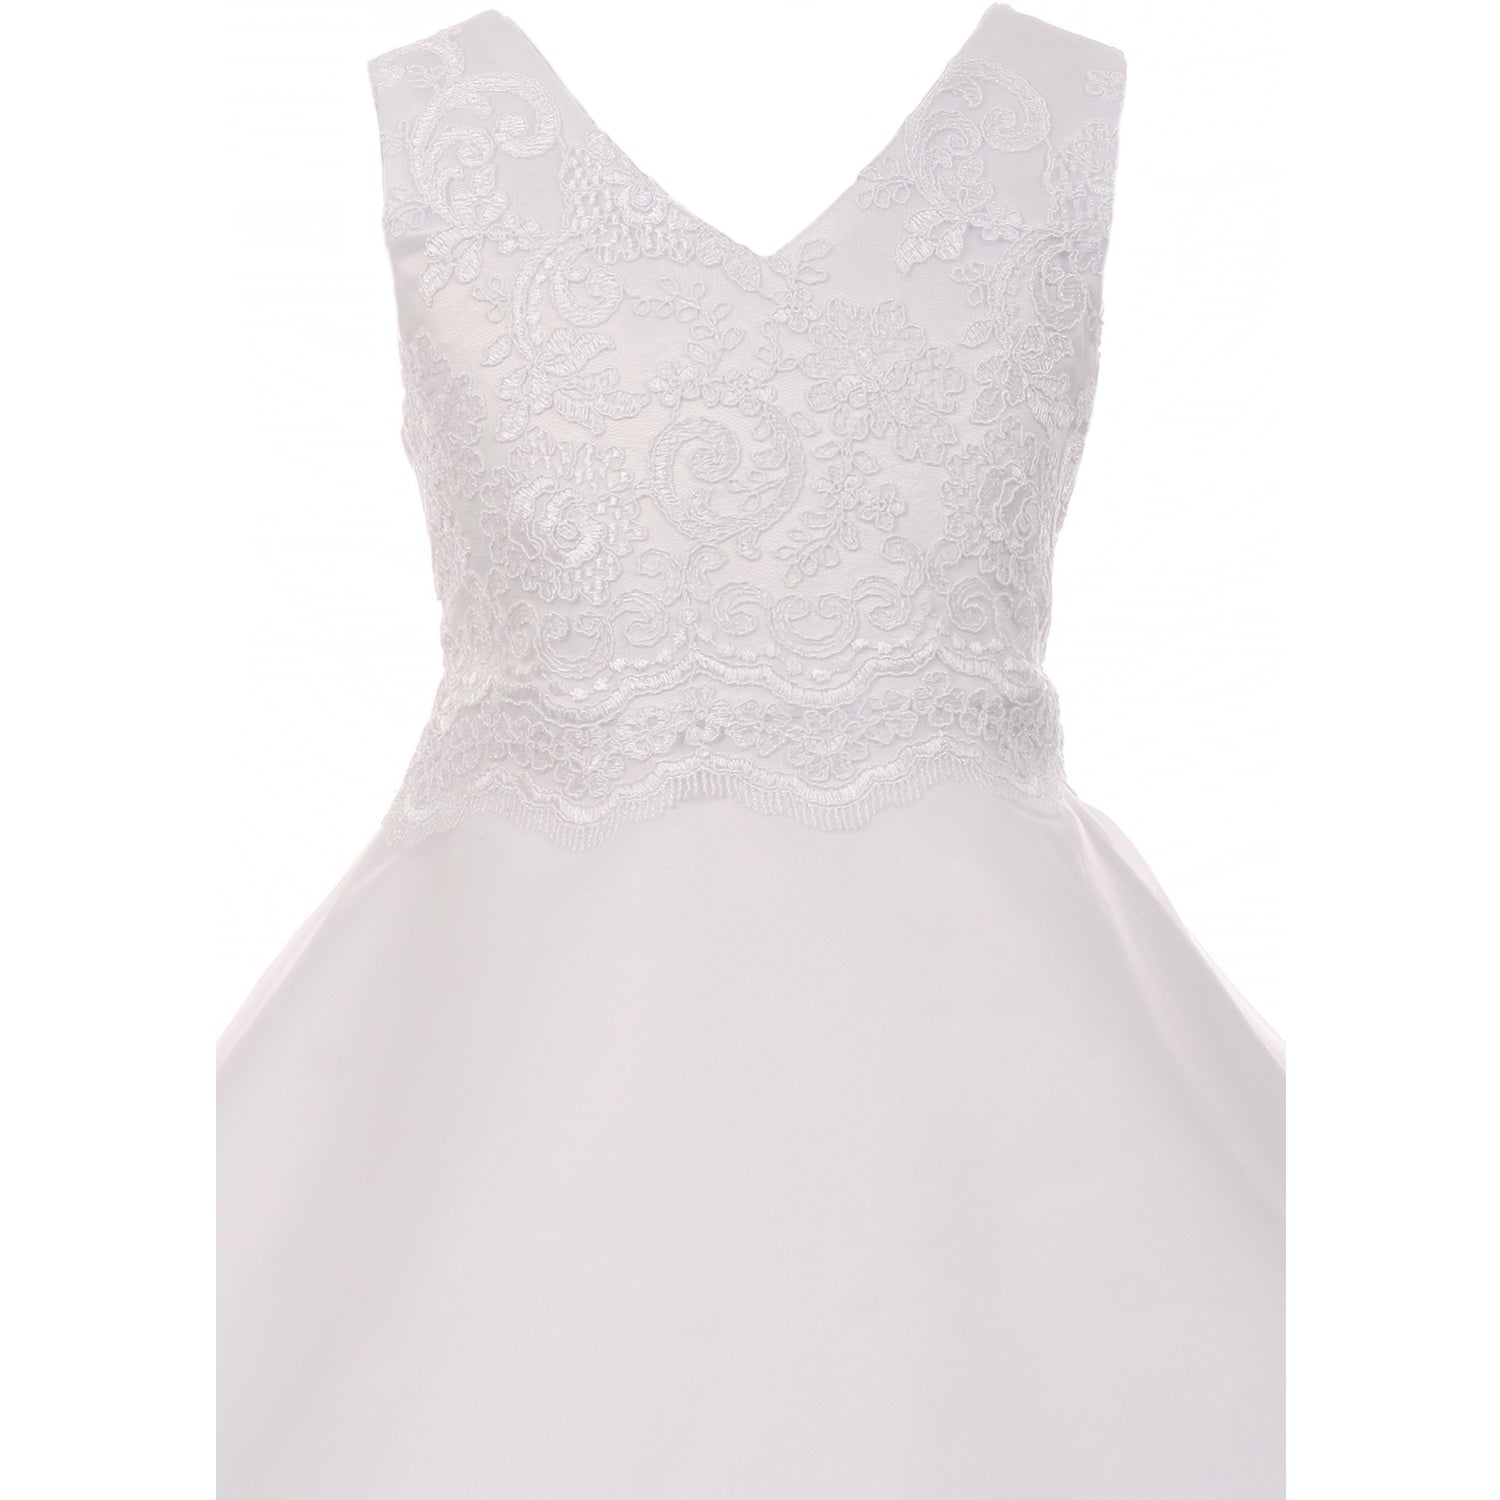 FULL LENGTH DRESS WITH LACE APPLIQUE ON SATIN BODICE